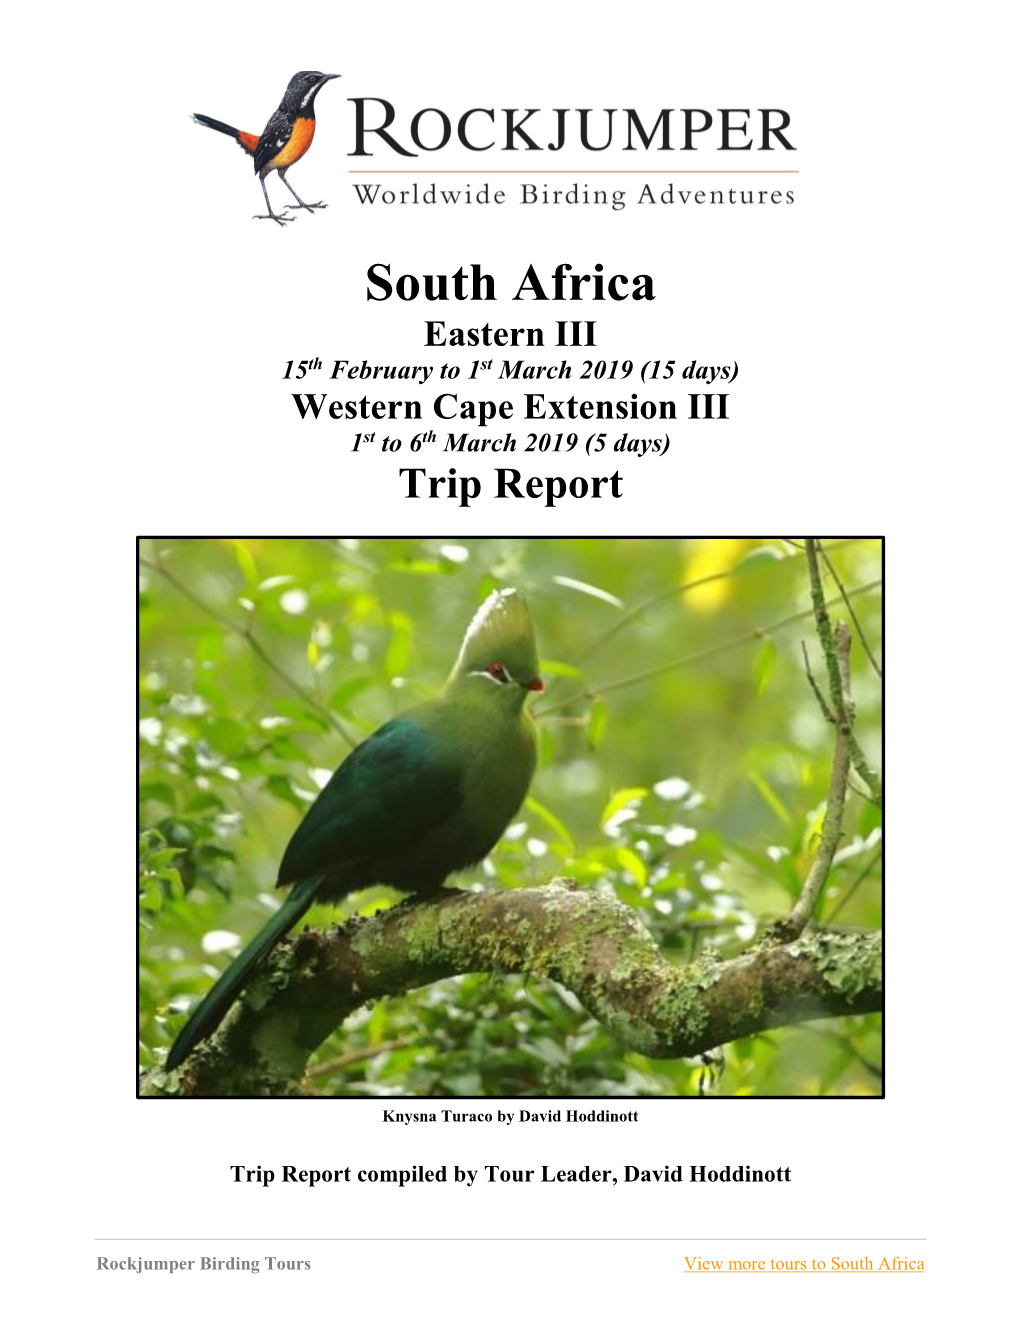 South Africa Eastern III 15Th February to 1St March 2019 (15 Days) Western Cape Extension III 1St to 6Th March 2019 (5 Days) Trip Report